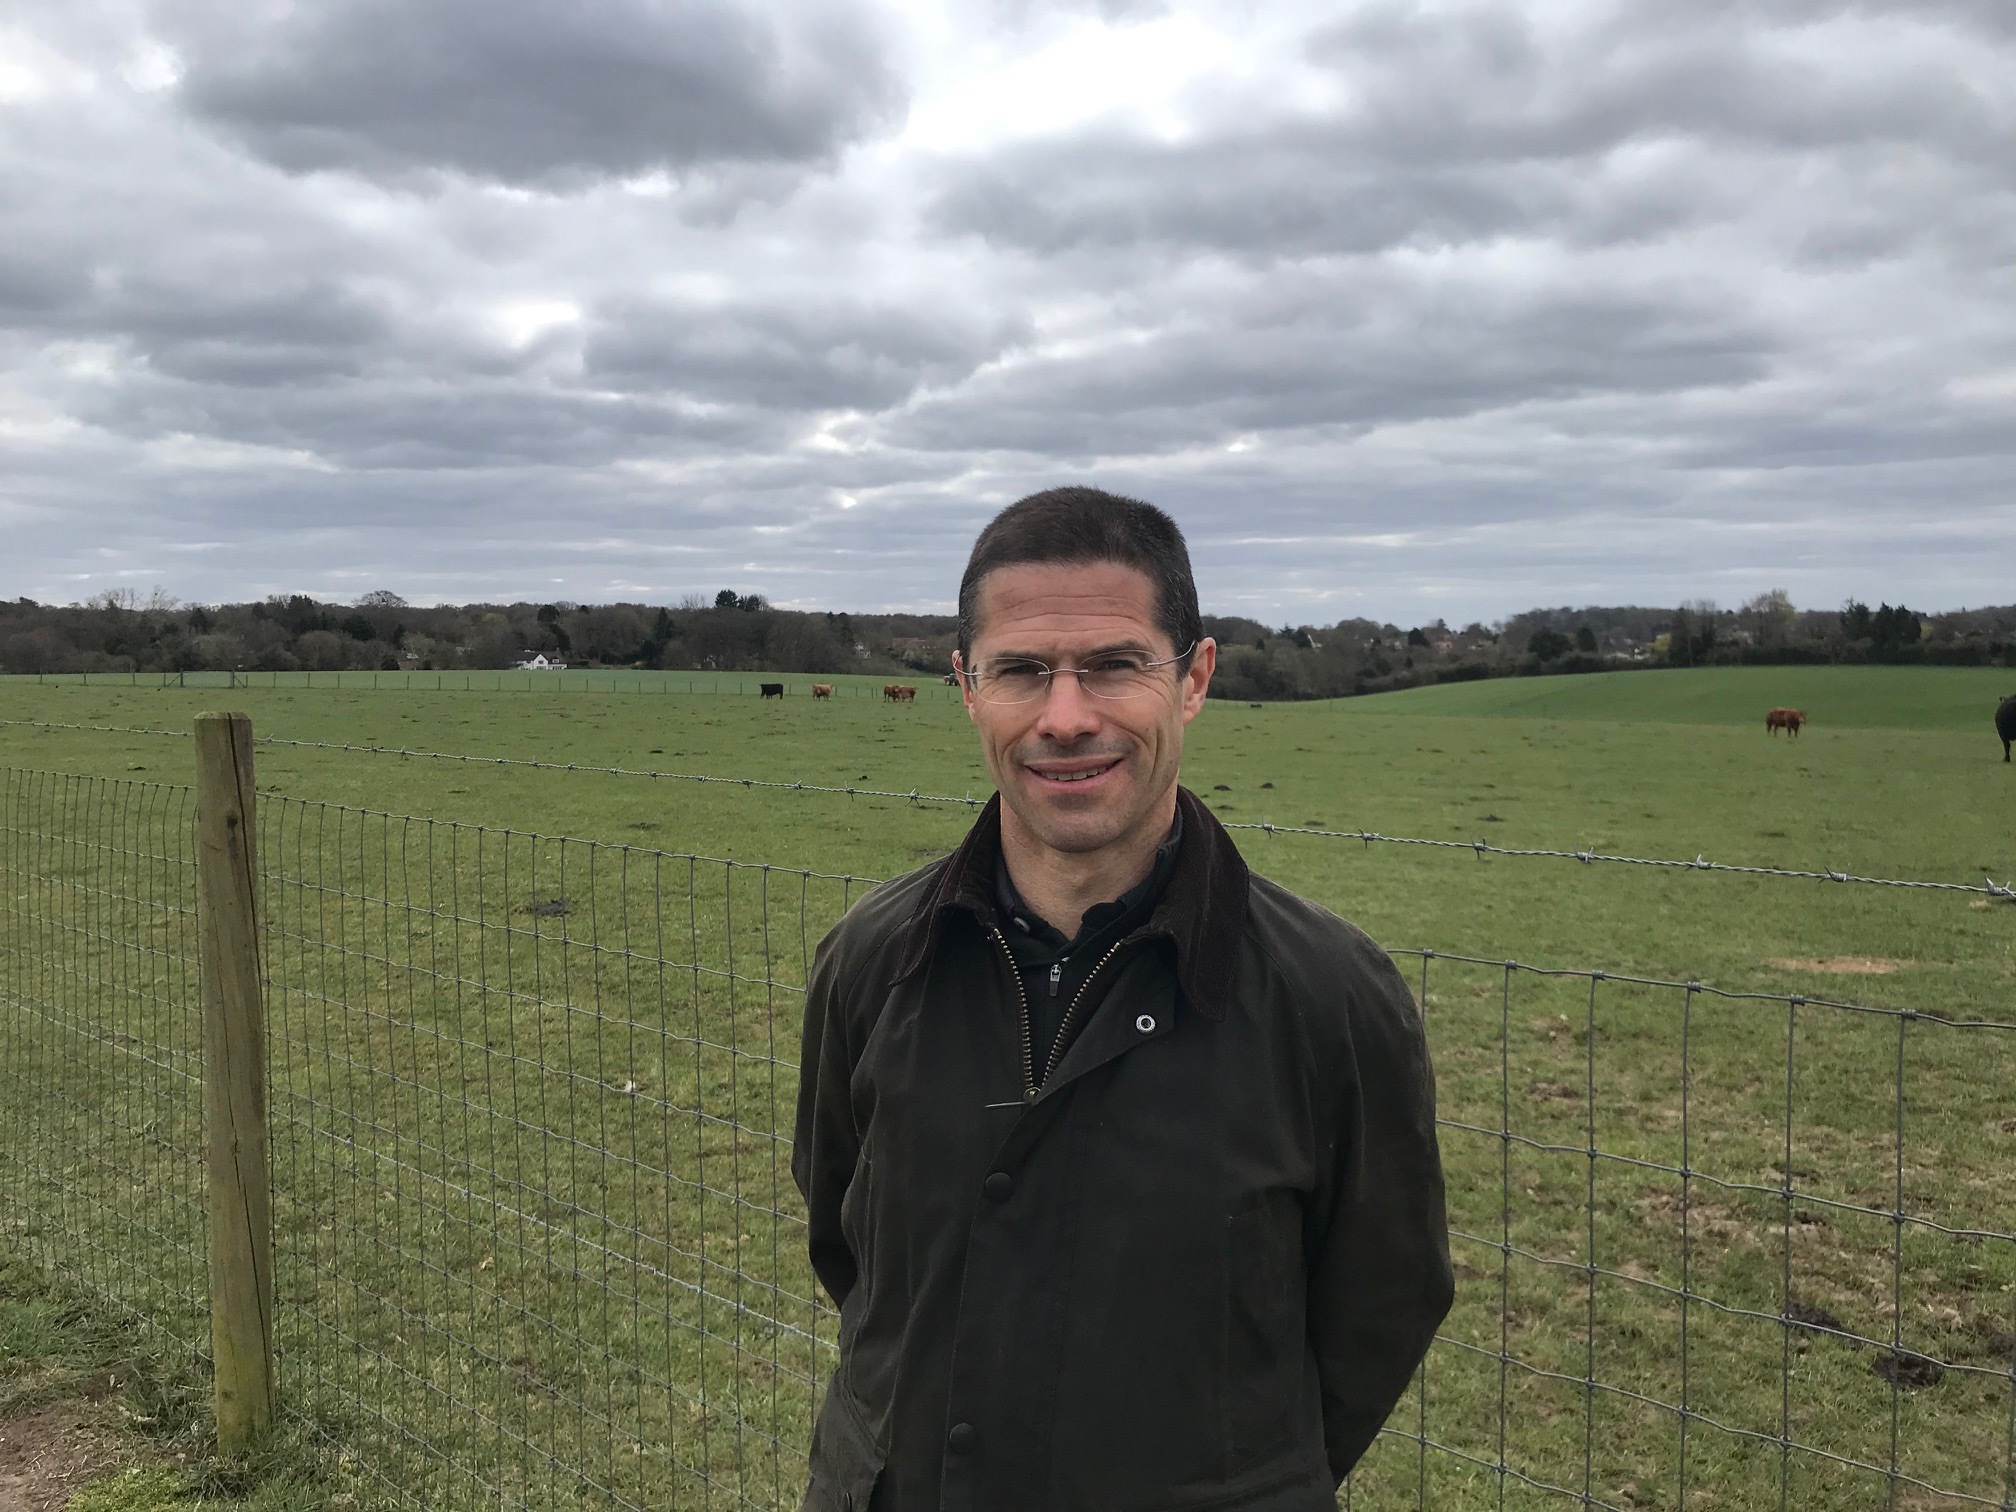 David Zerny, who ran as an Independent candidate at the recent Three Rivers local elections, says he does not want to see any building on the greenbelt